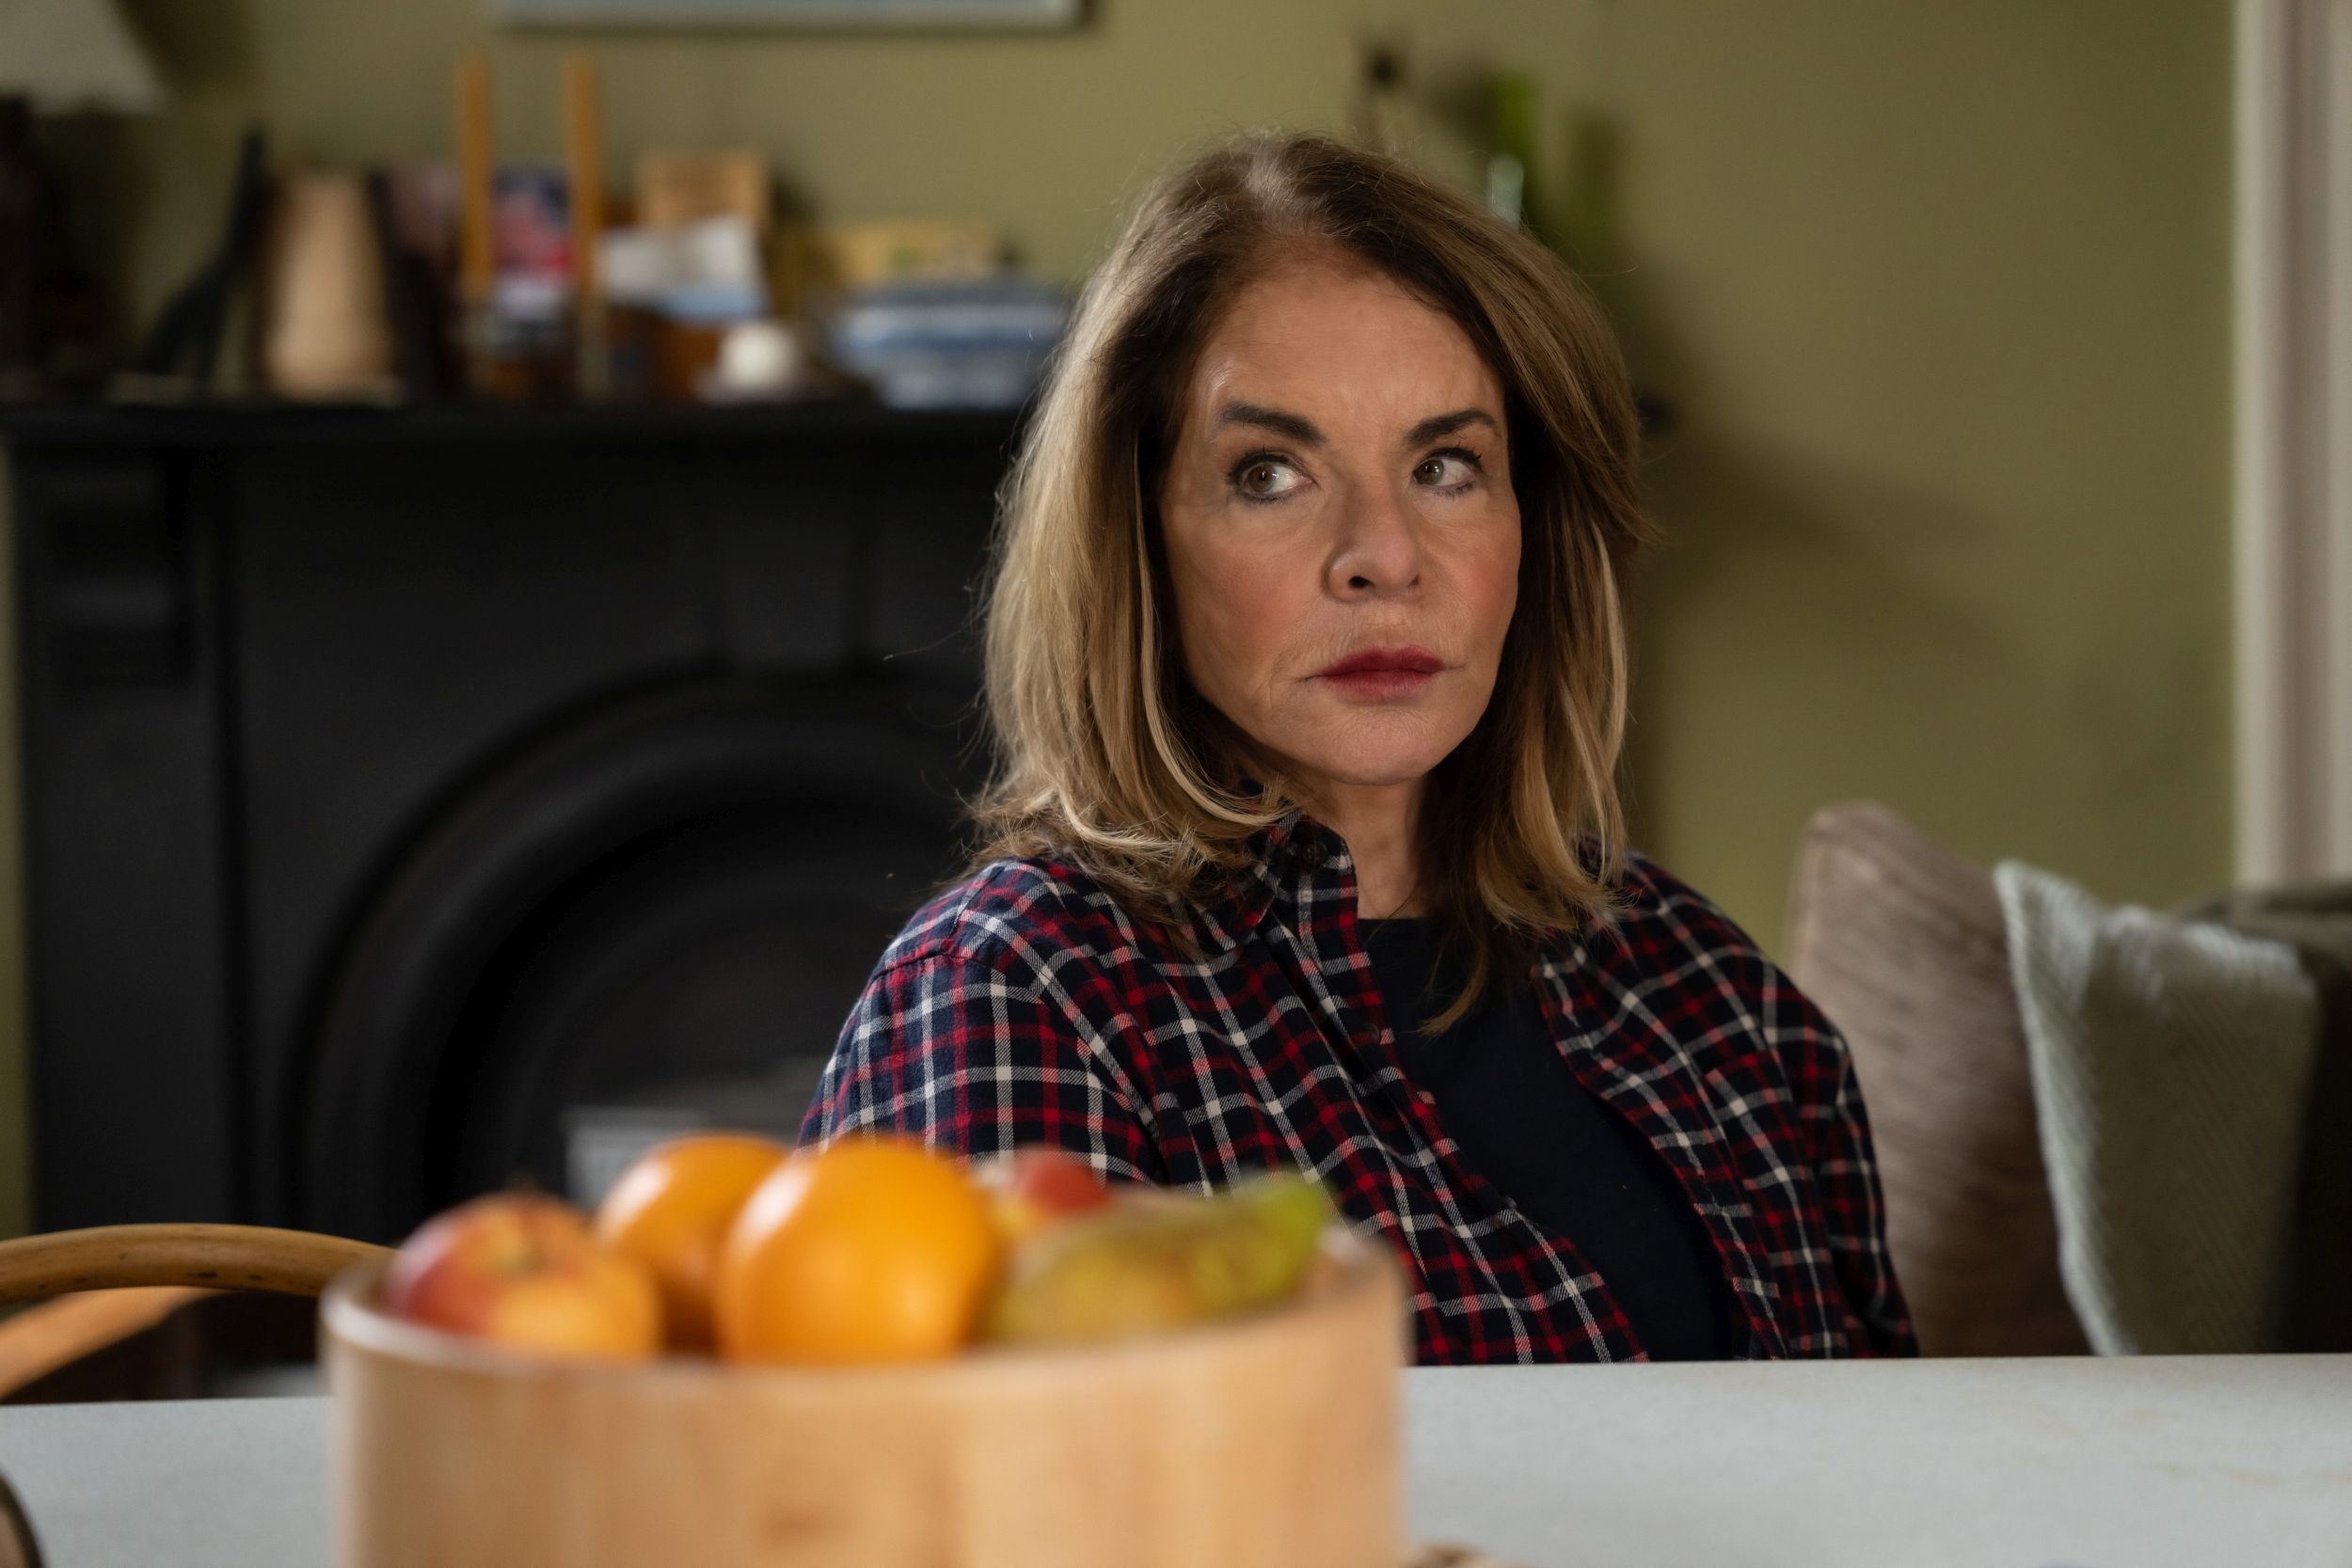 Stockard Channing as Cathy at the kitchen table in Maryland Episode 1